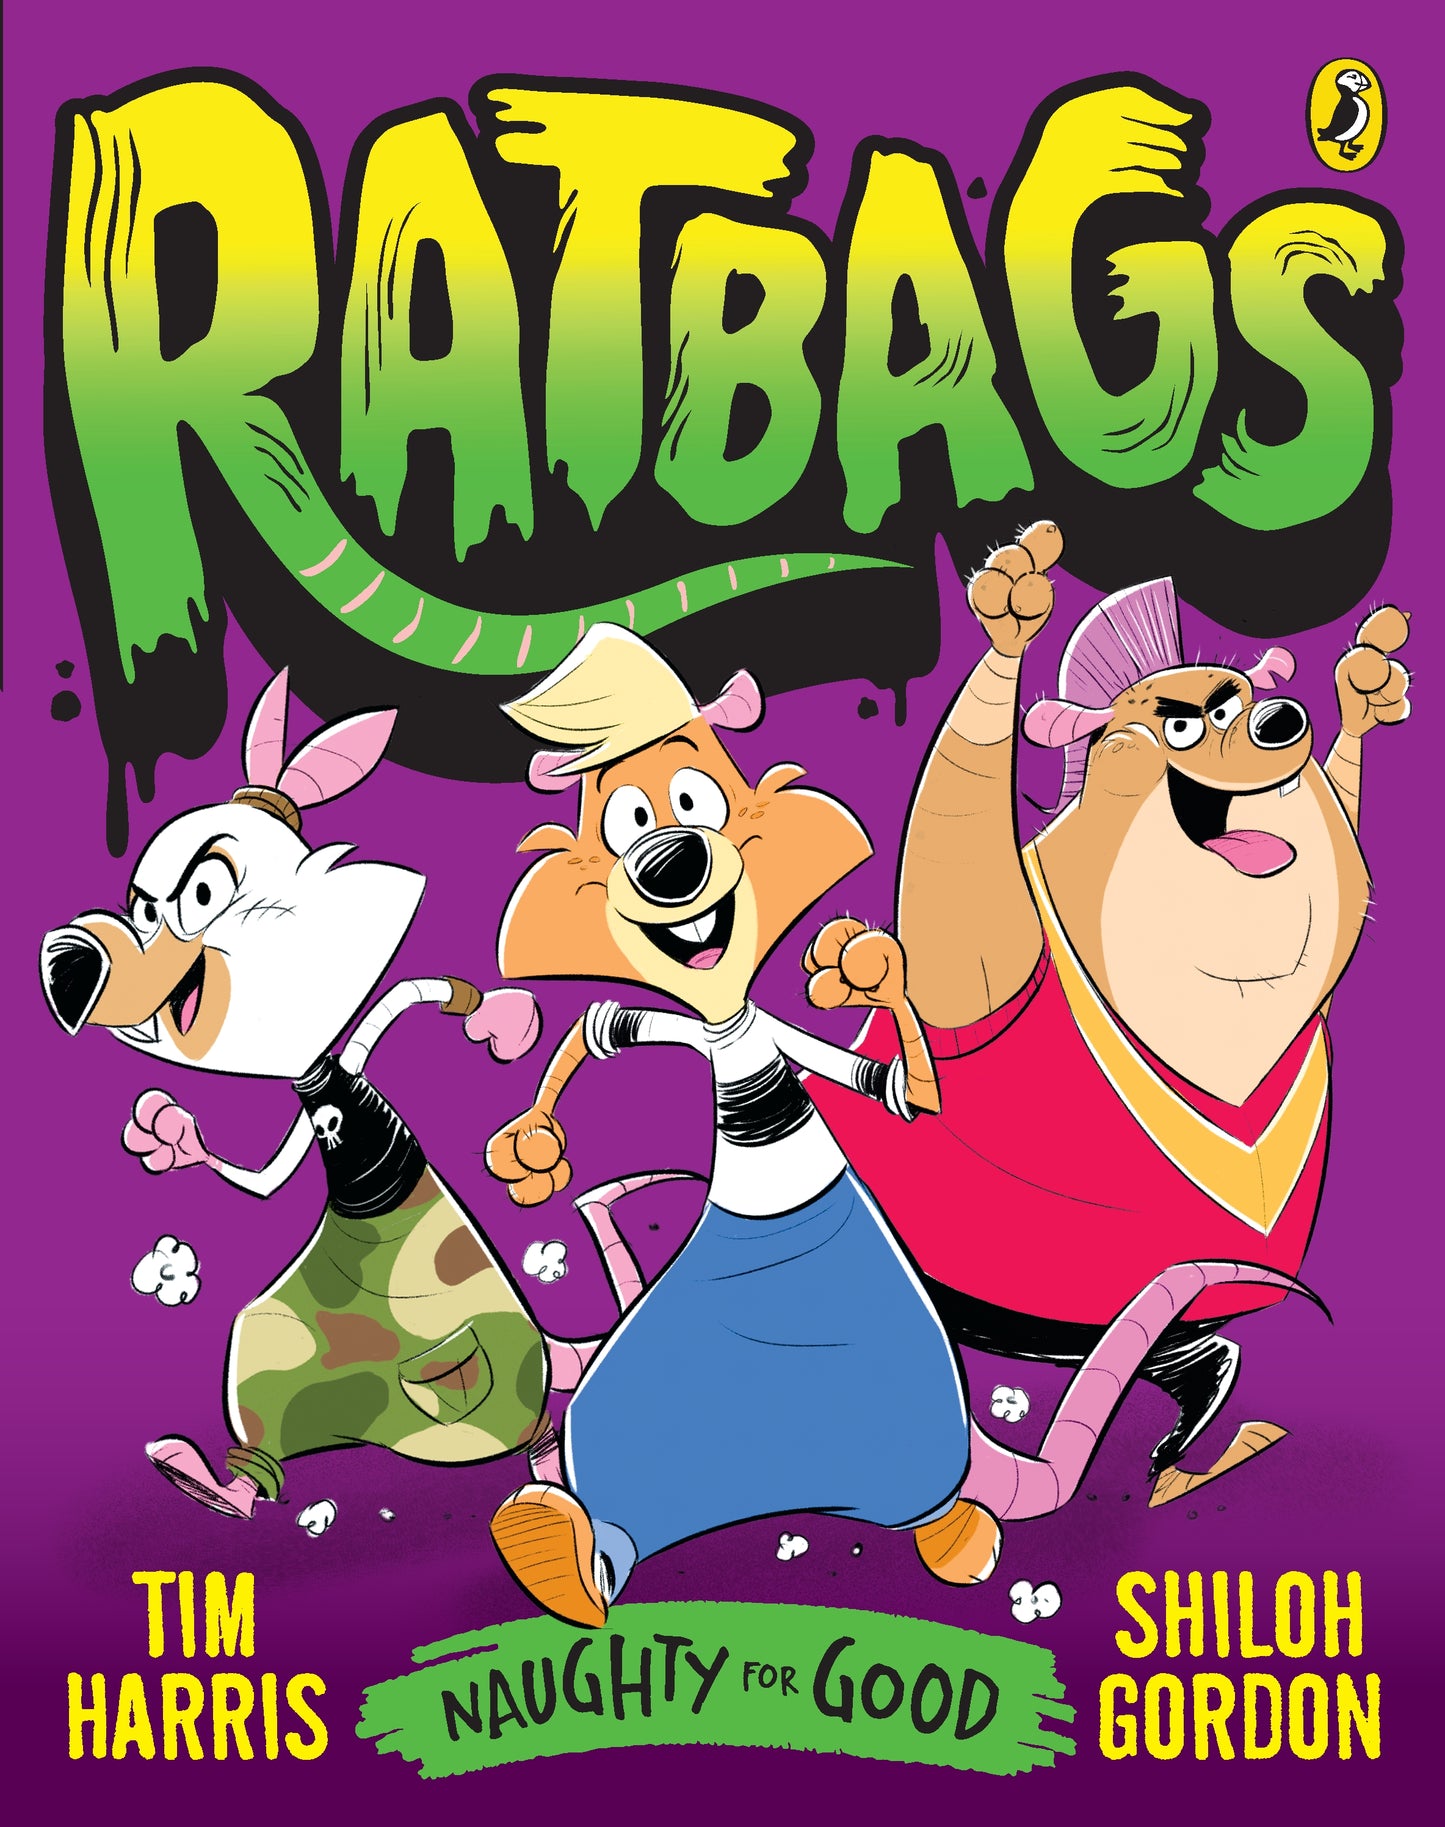 Ratbags 1 - Naughty For Good by Tim Harris and Shiloh Gordan